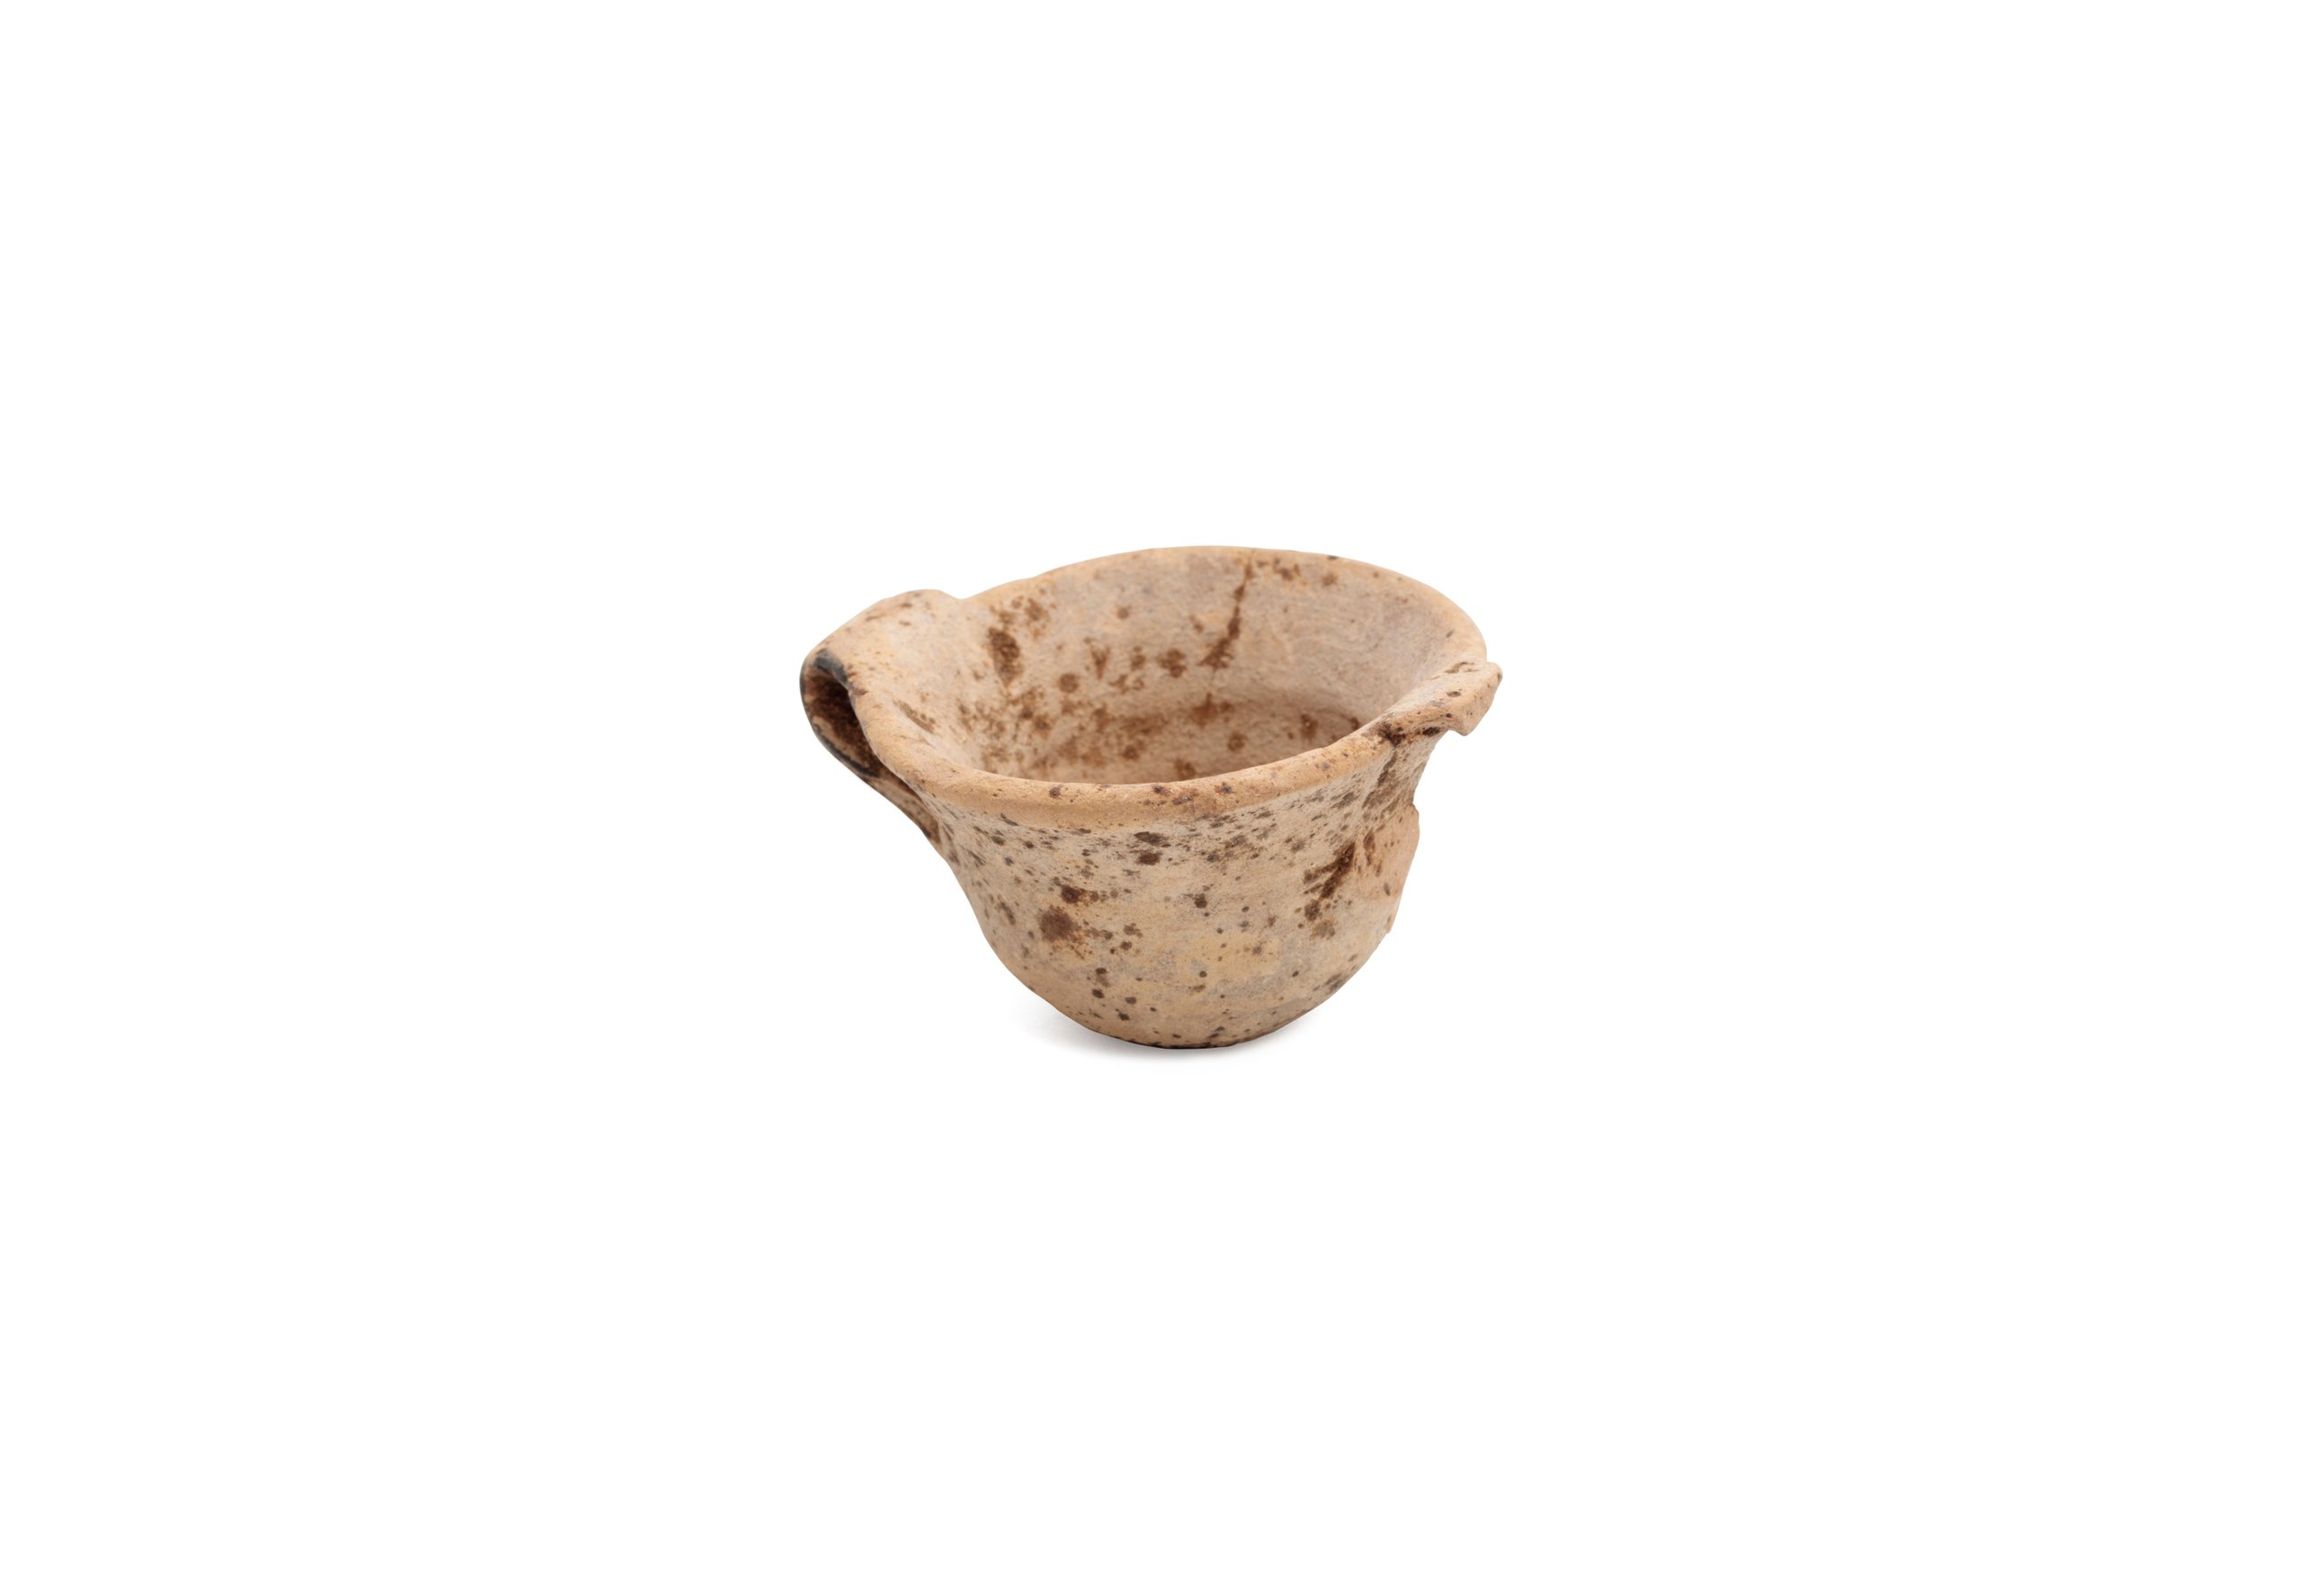 Ceramic cup from Egypt or Palestine